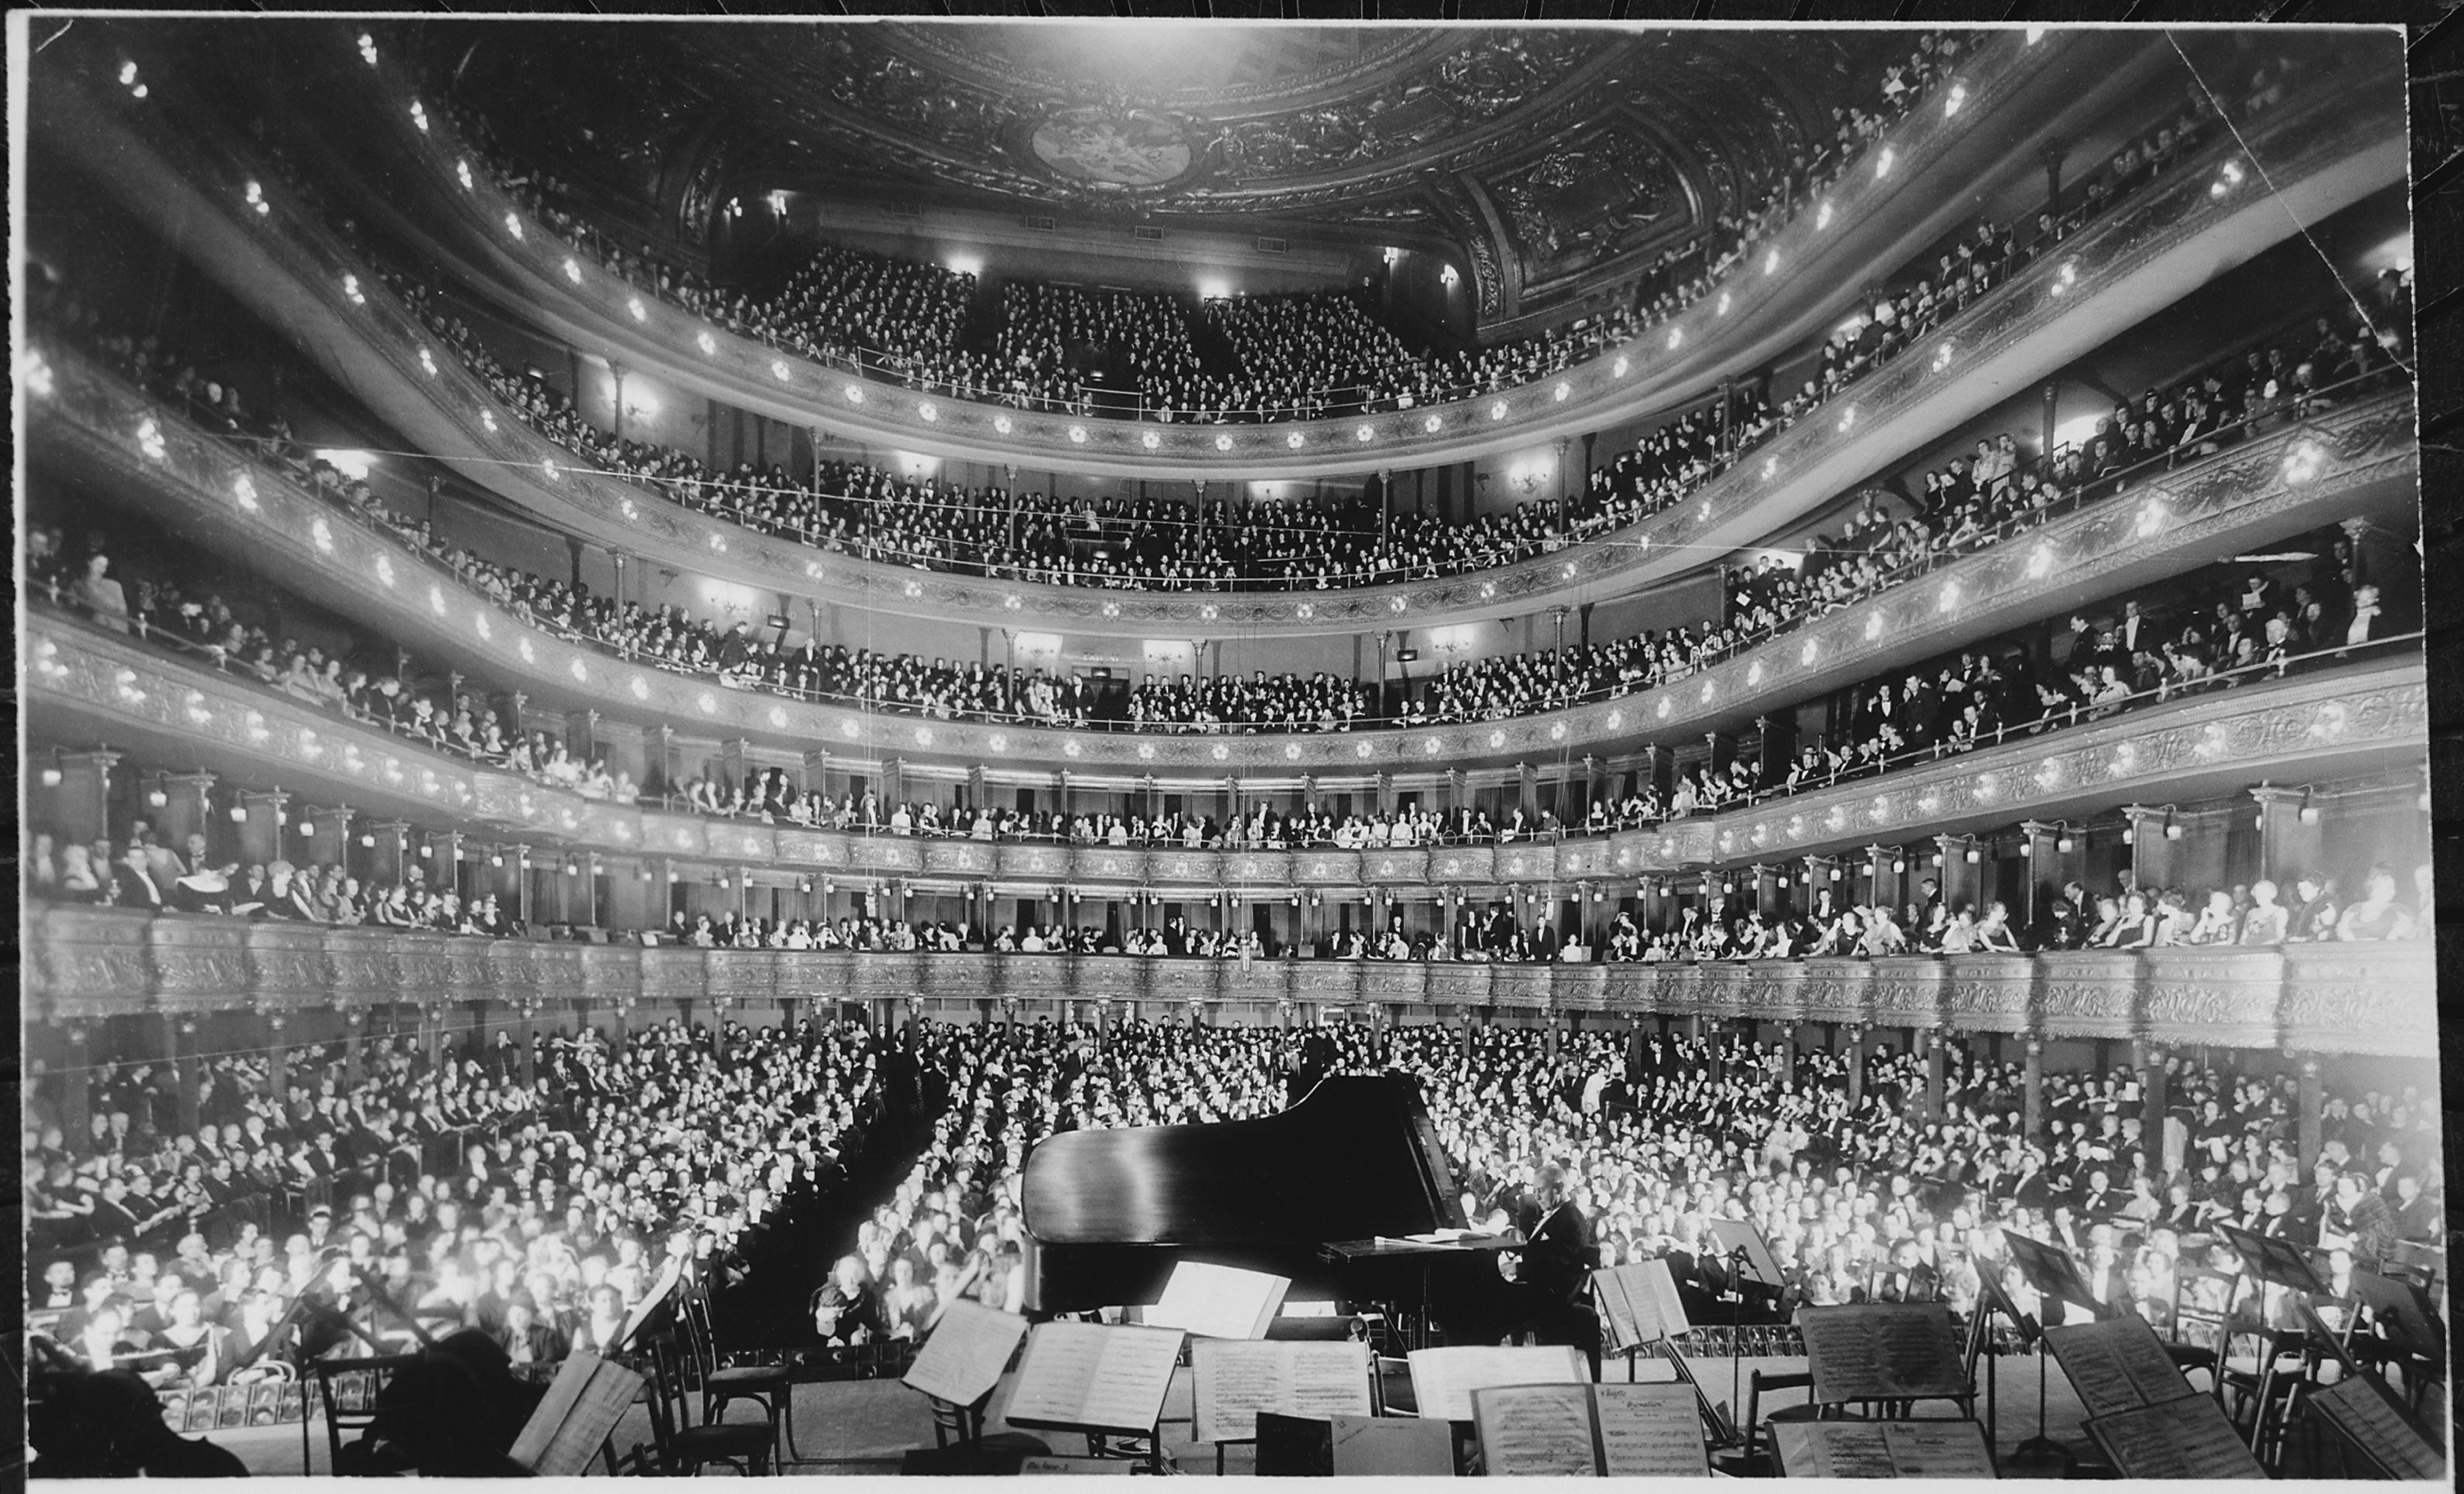 A full house, seen from the rear of the stage, at the Metropolitan Opera House for a concert by pianist Josef Hofmann, 1 - NARA - 541890